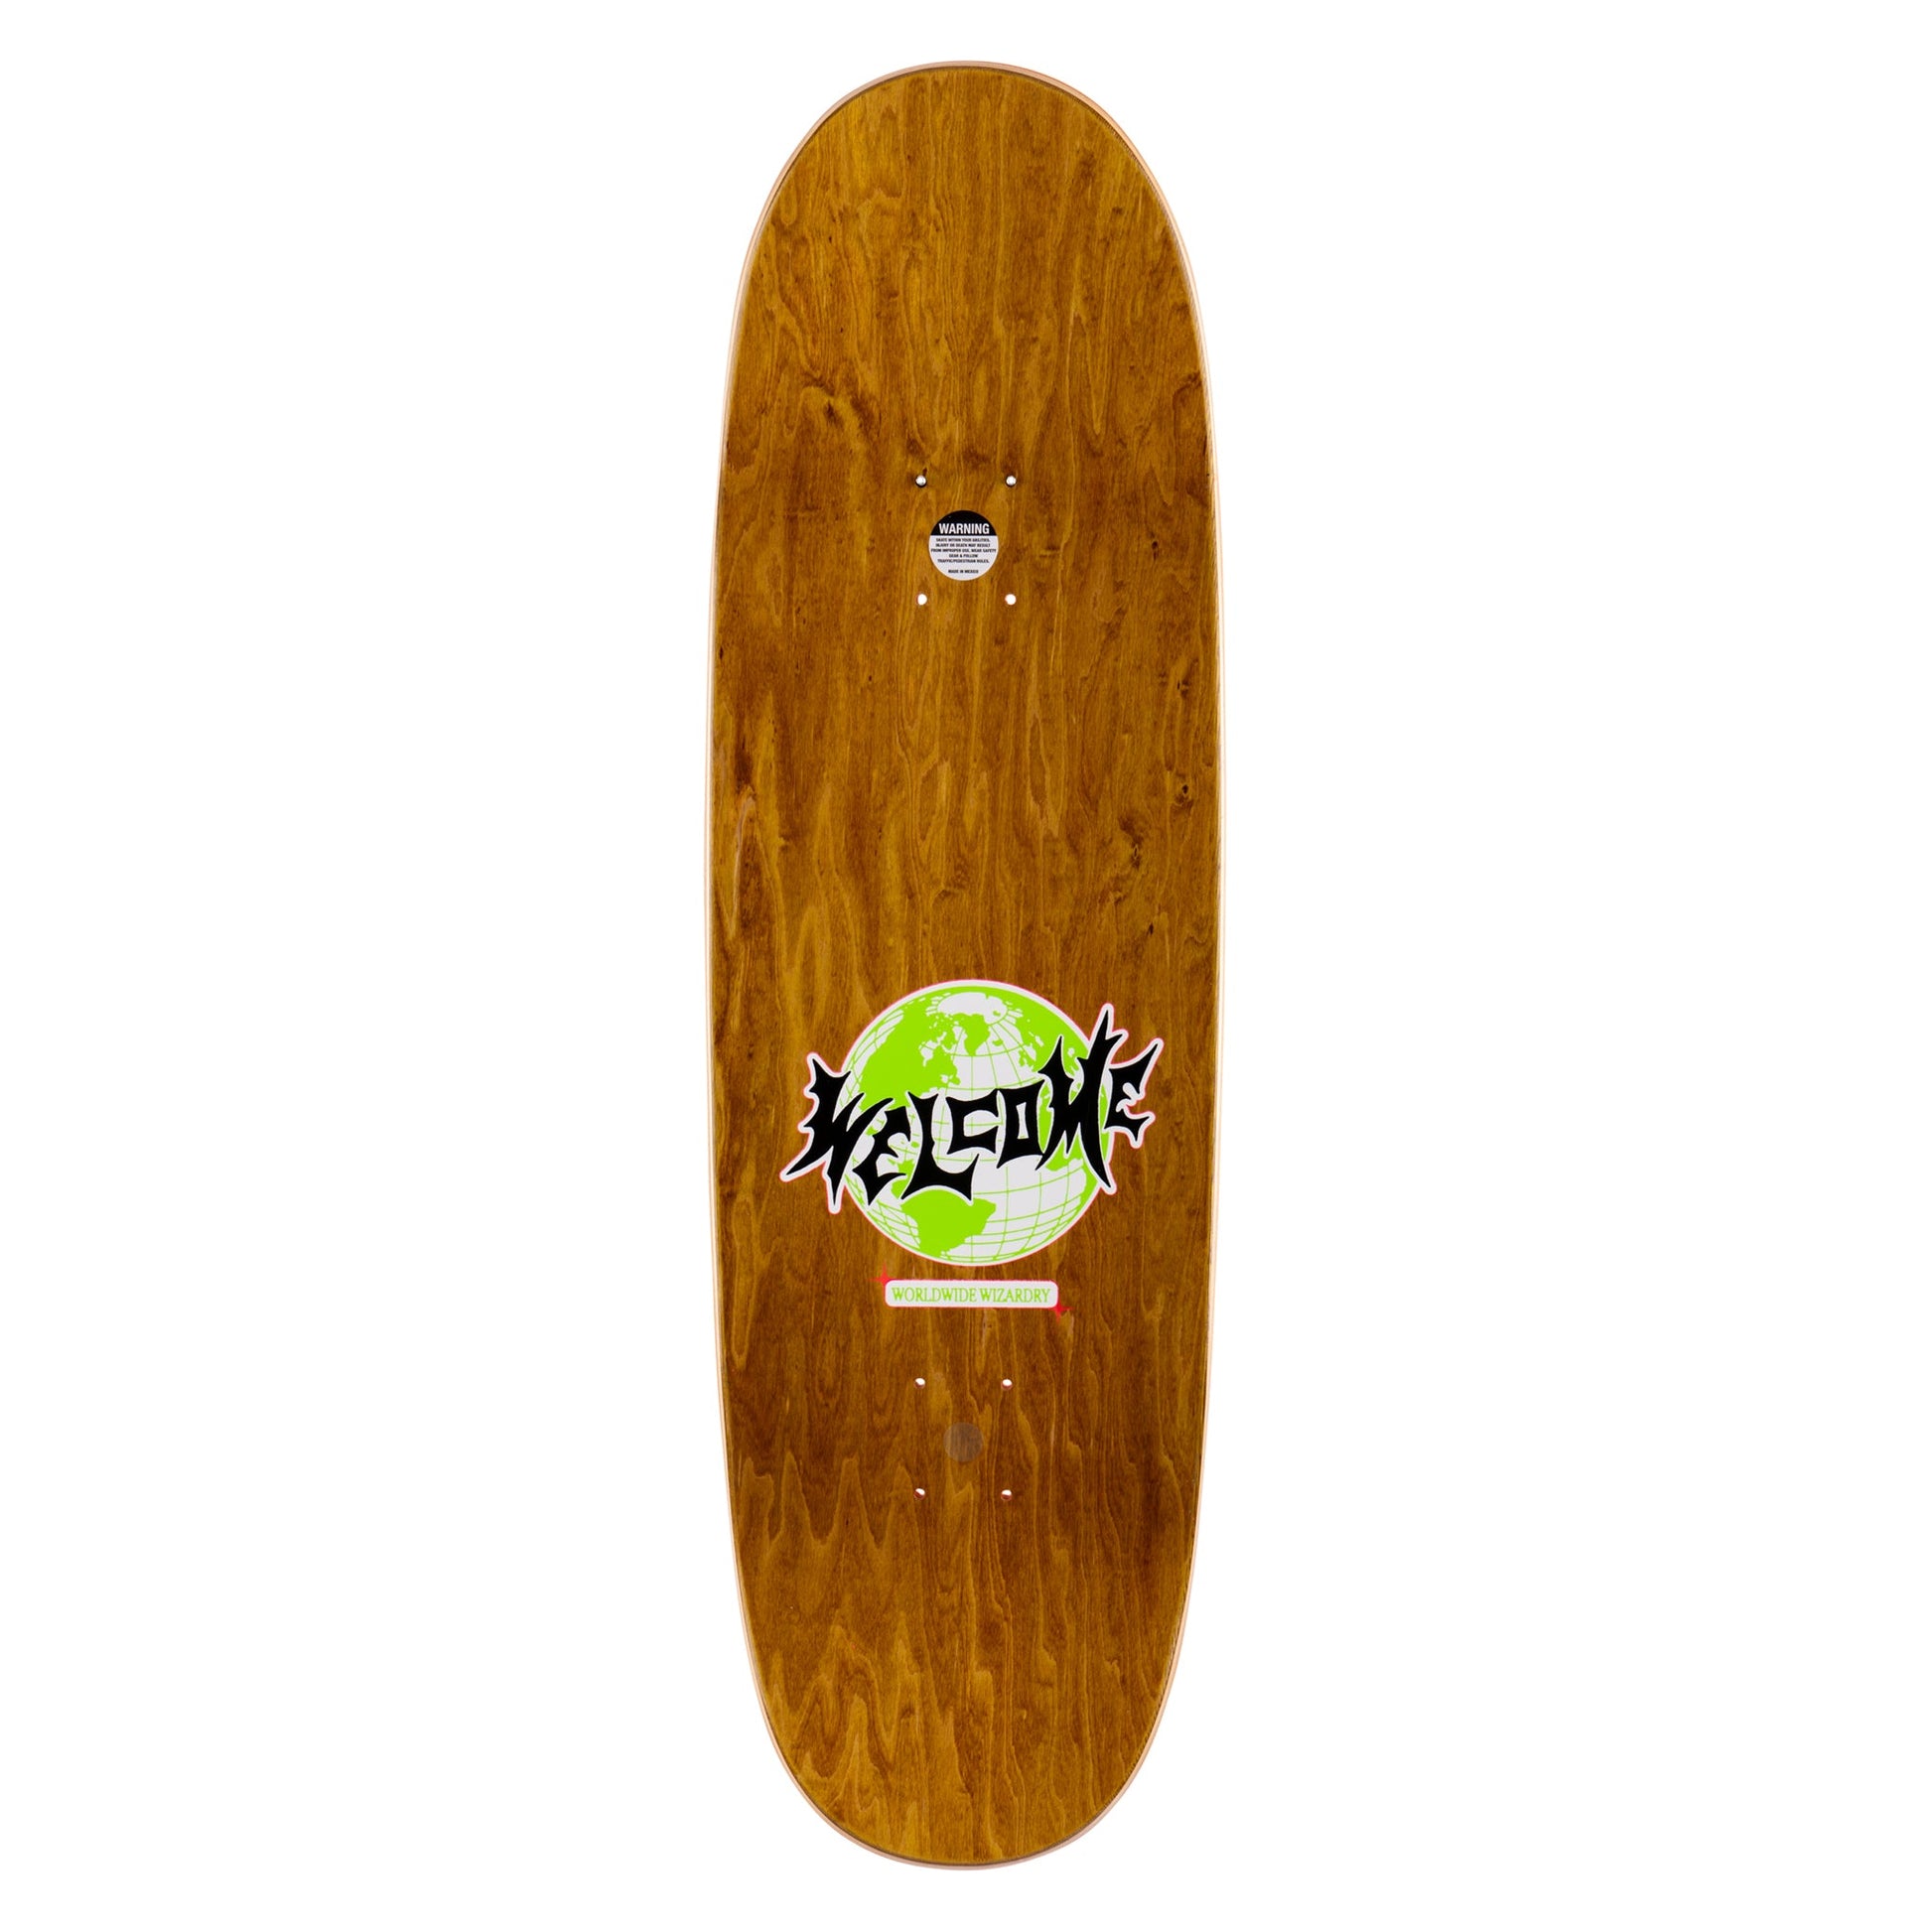 Welcome Sloth on Boline 2.0 Neon Pink Deck - 9.5" - Vault Board Shop Welcome